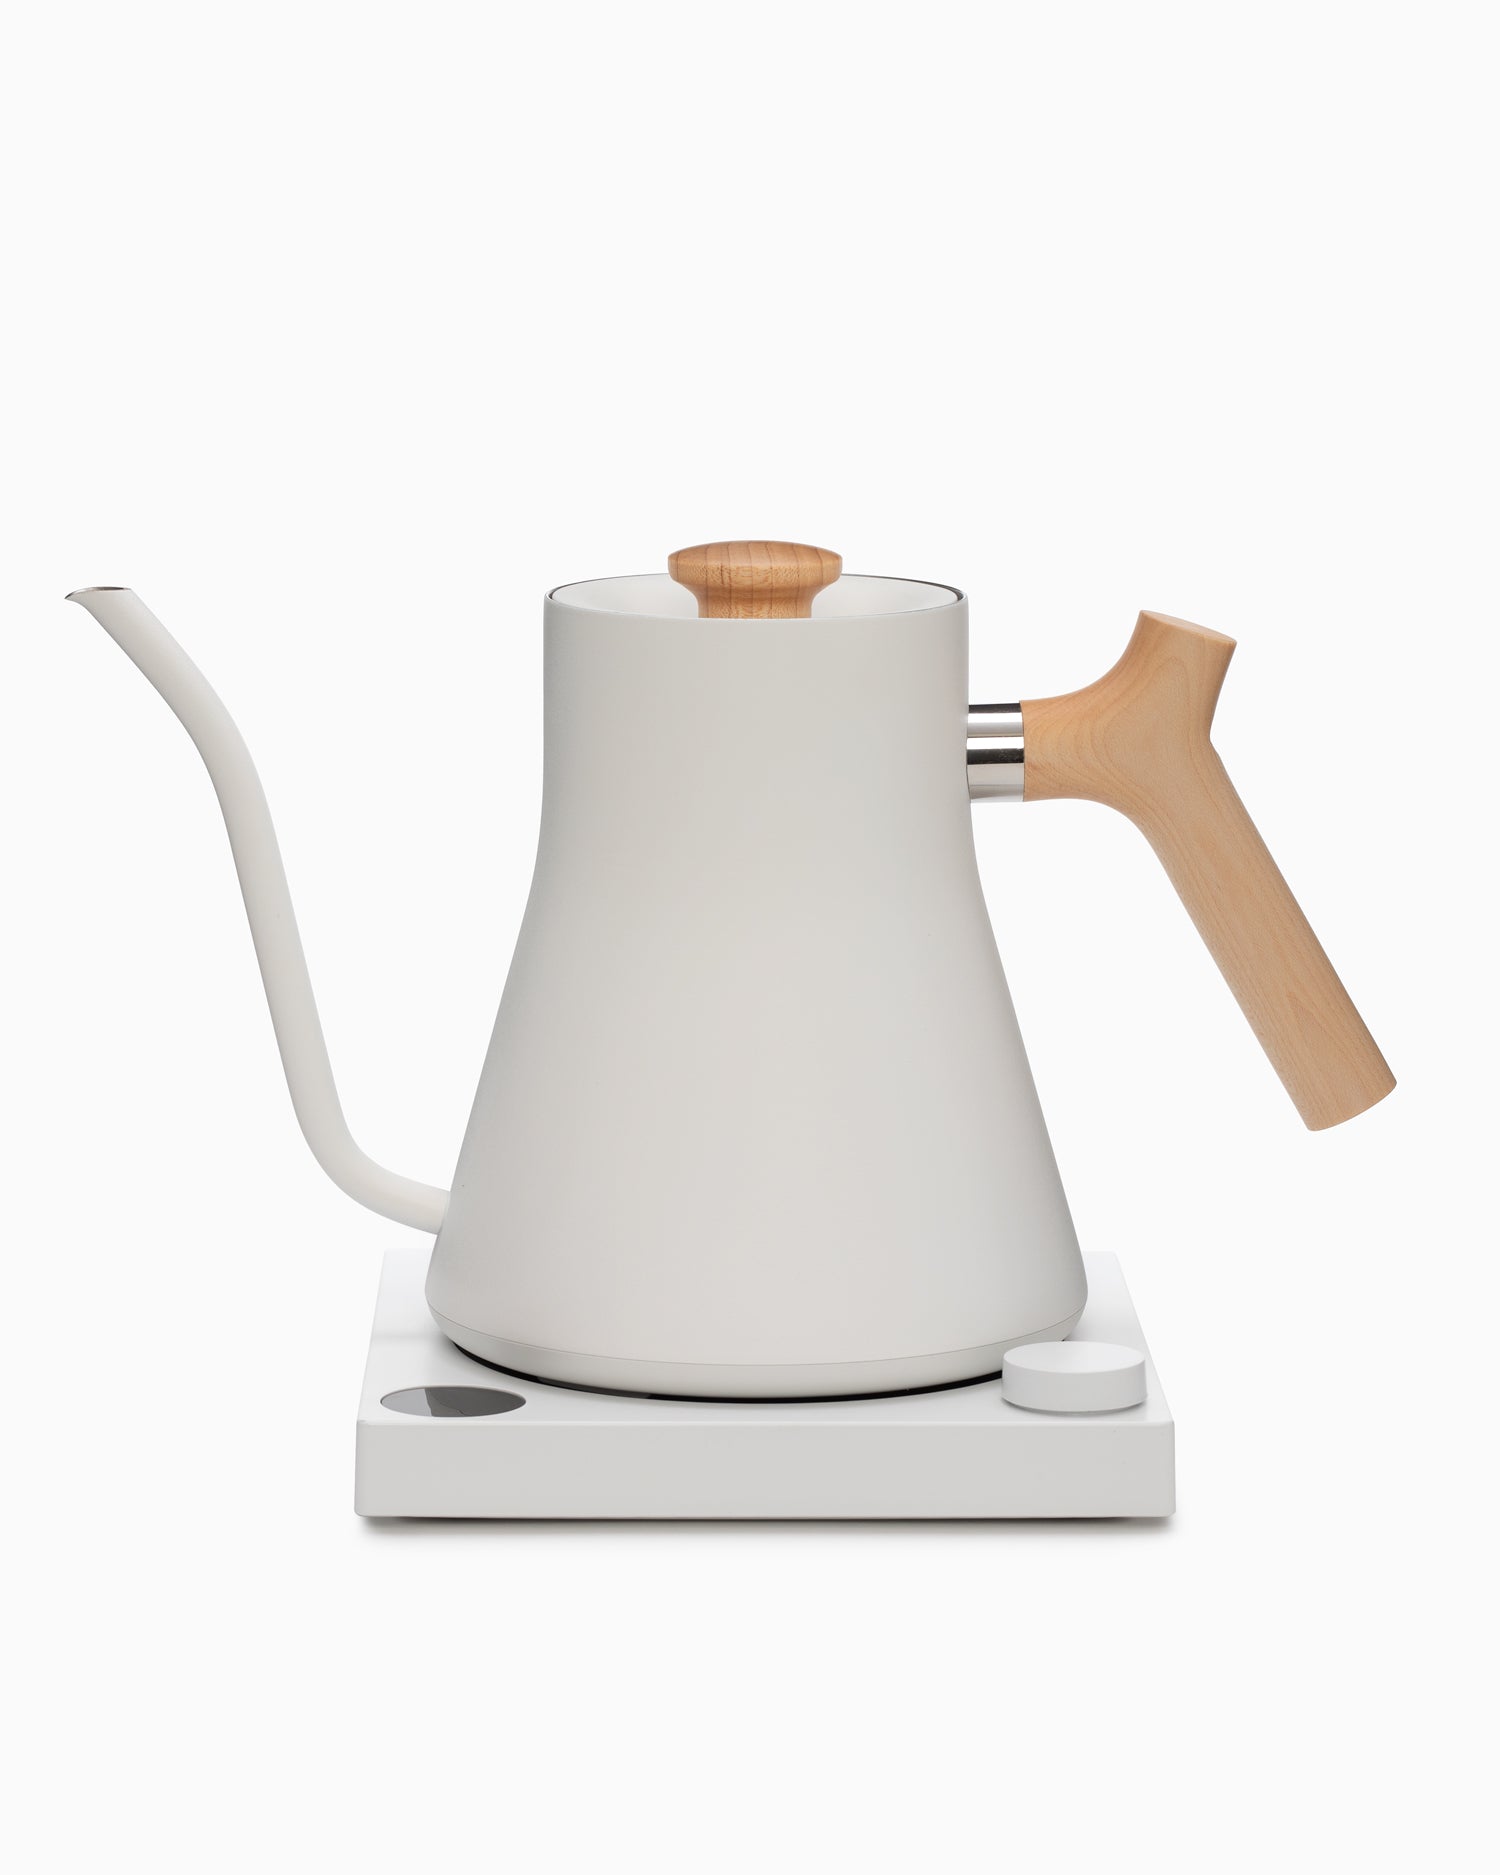 Stagg EKG Electric Kettle - Matte White and Maple